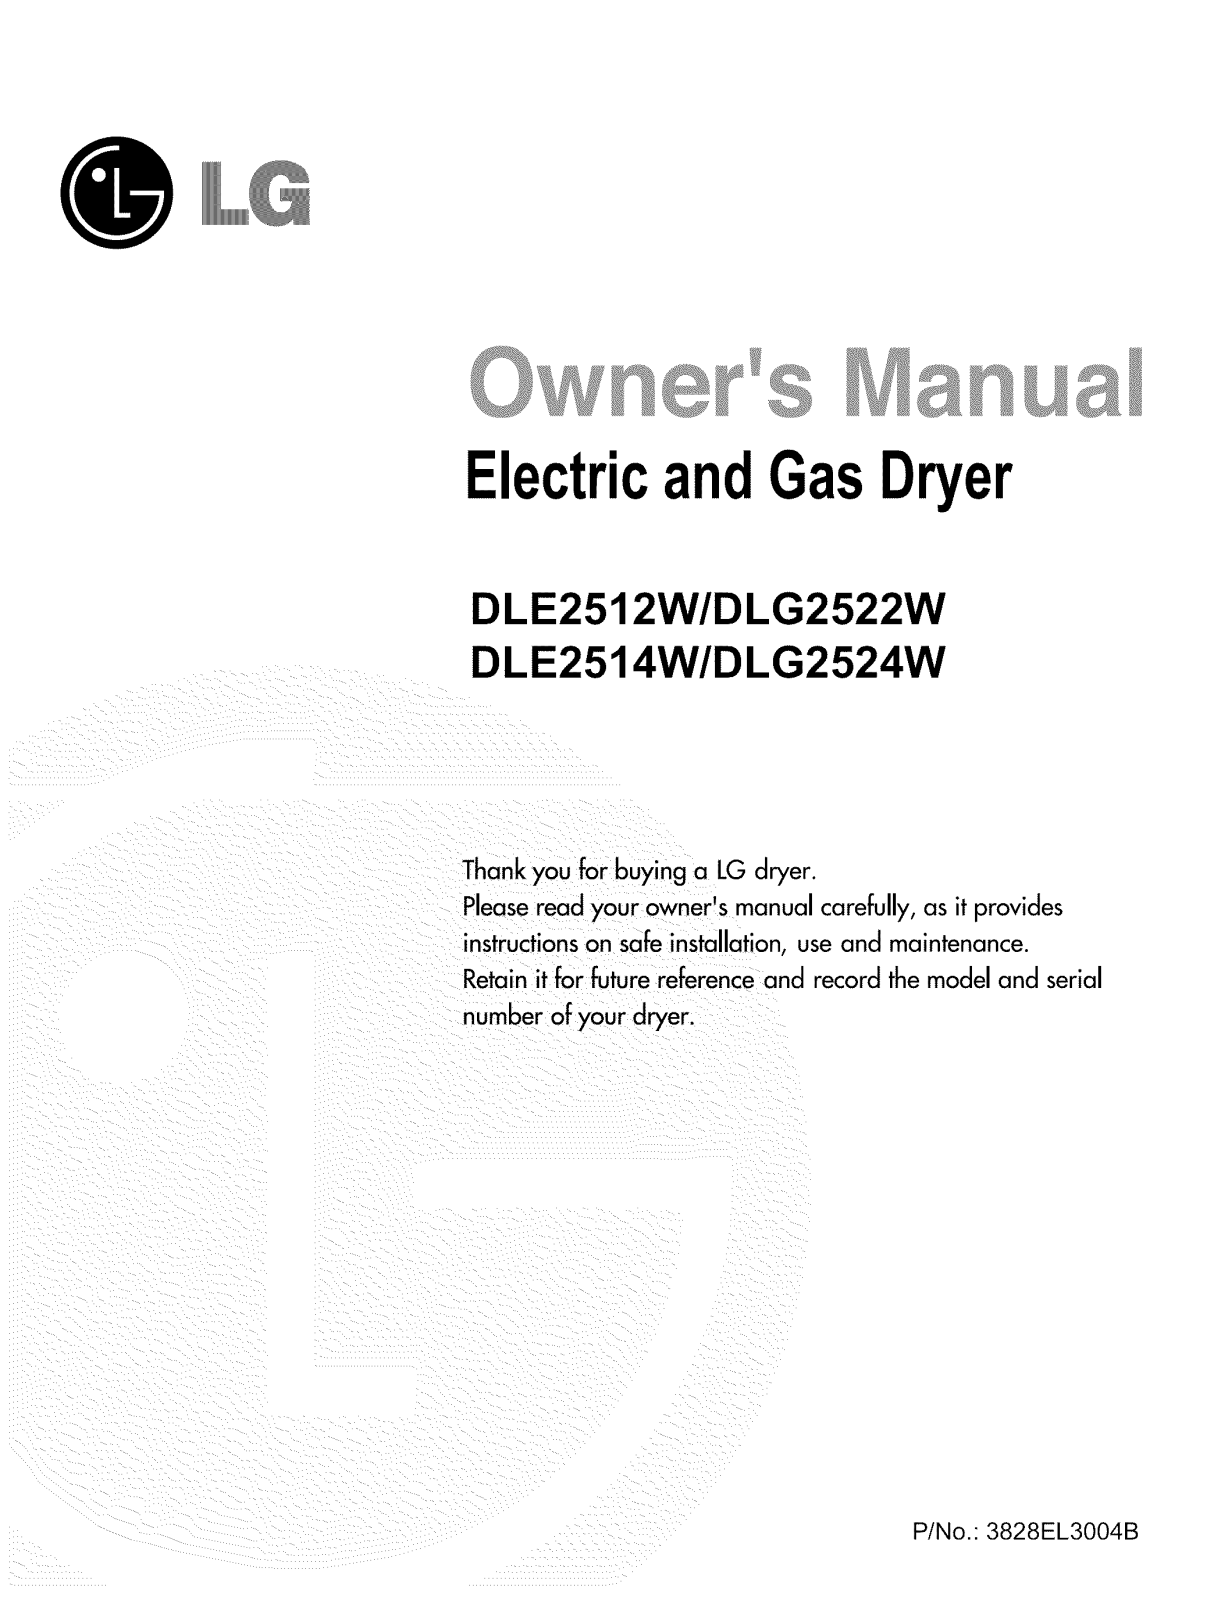 LG DLG2525S, DLG2524W, DLG2522W, DLE2515S Owner’s Manual